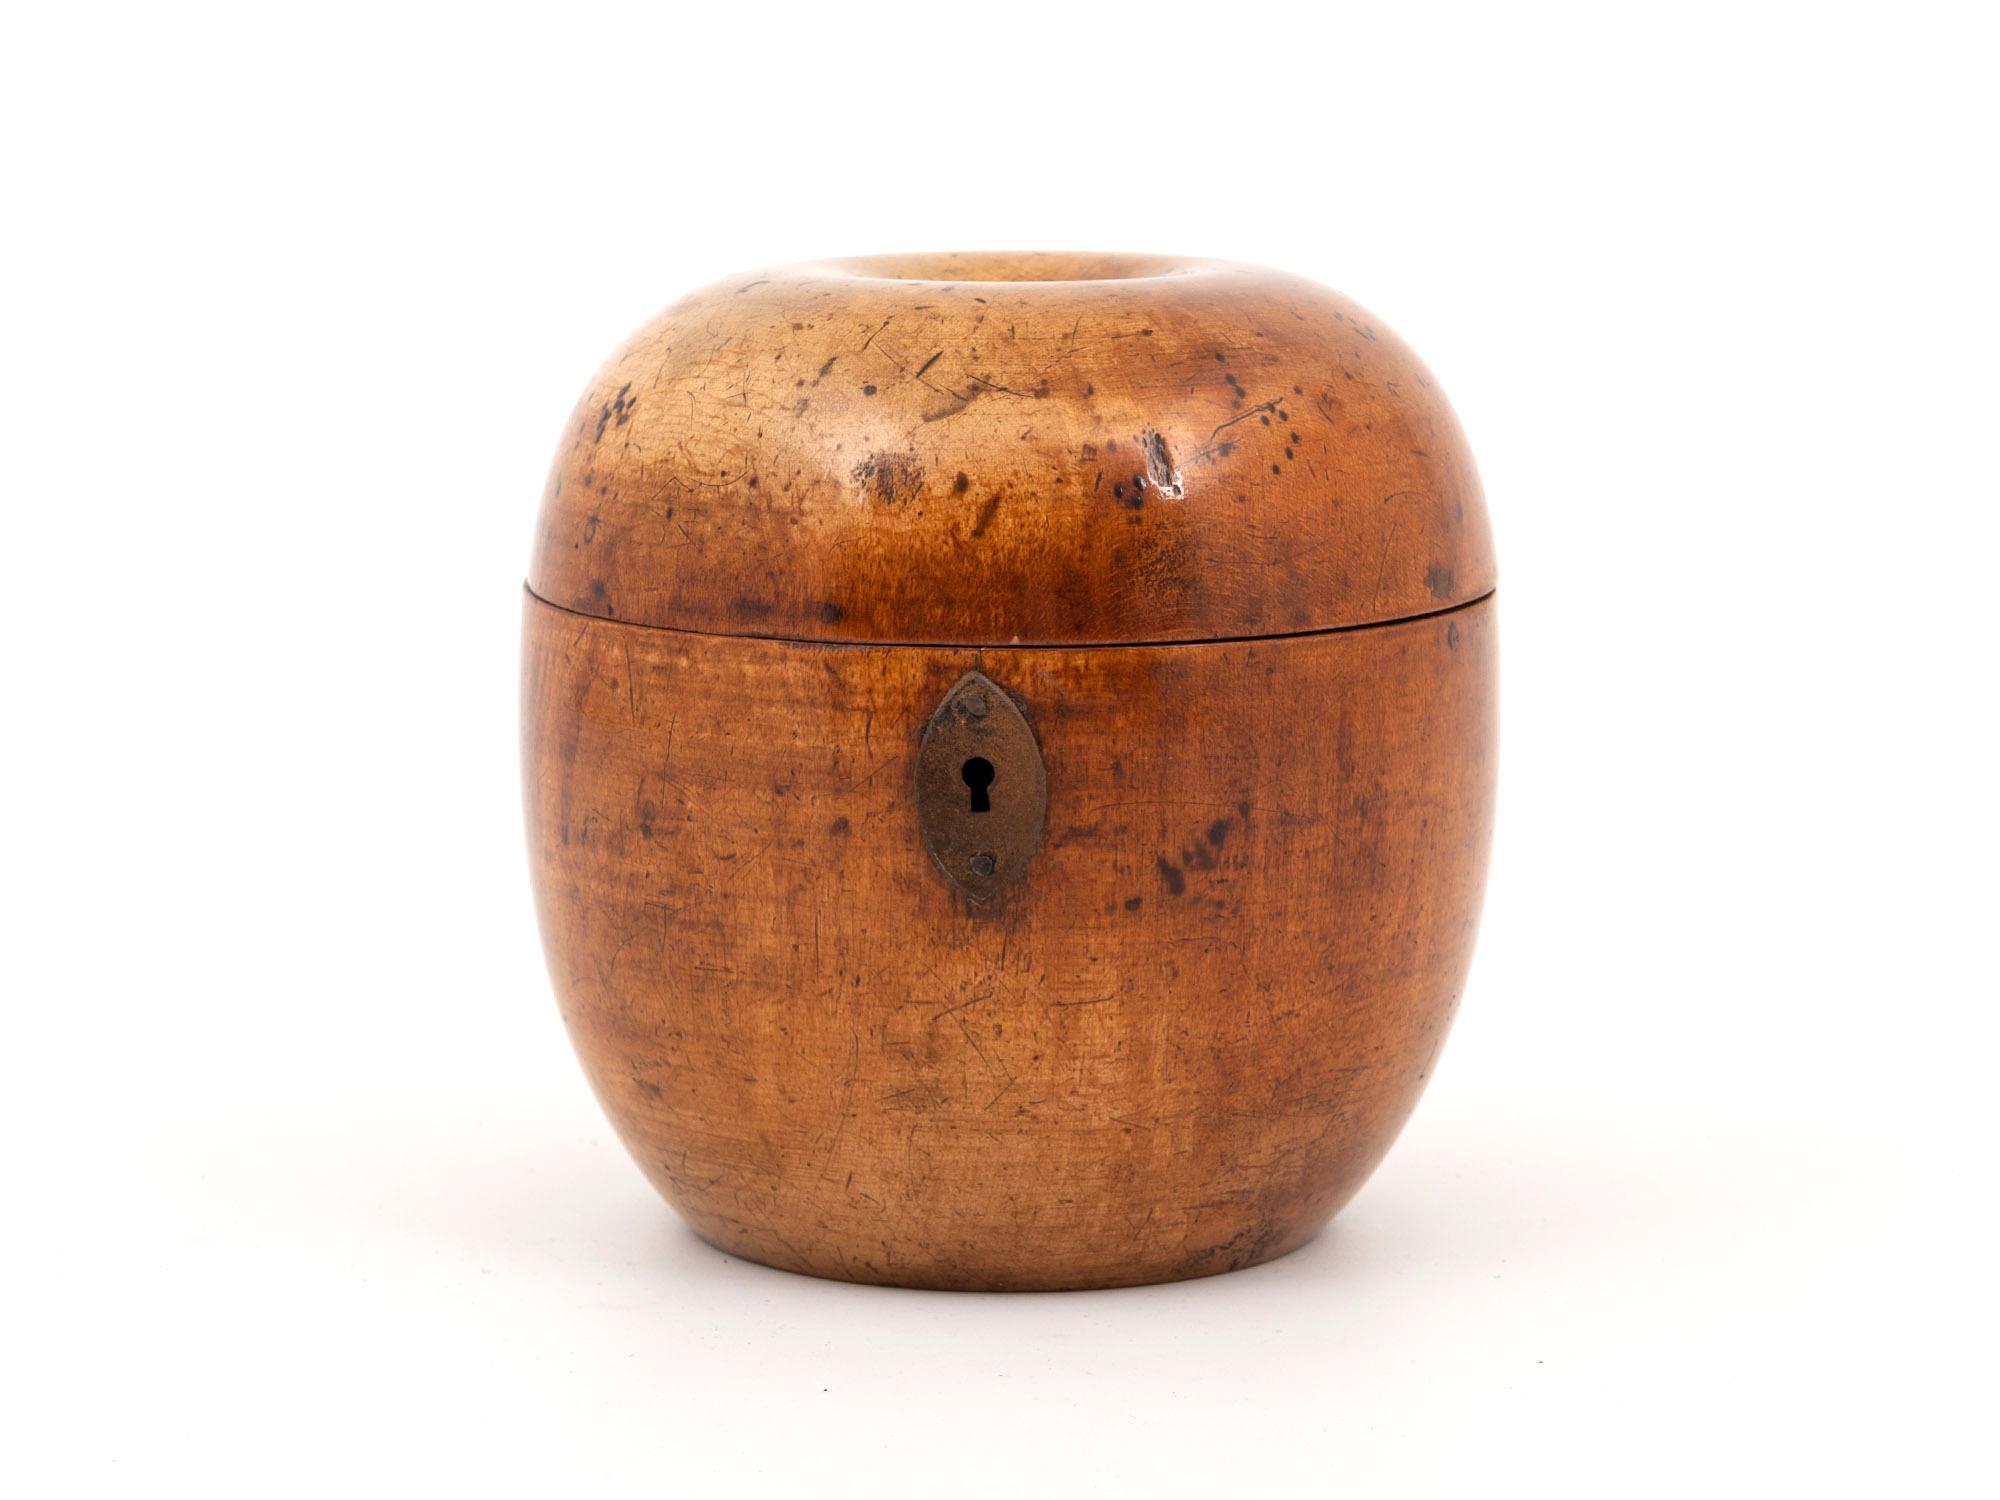 Shaped as an Apple

From our Tea Caddy collection, we are delighted to offer this superb Georgian Apple Treen Tea Caddy. The Tea Caddy carved from Sycamore as a novelty Apple with a button stalk, shaped body and shaped cut steel escutcheon. When